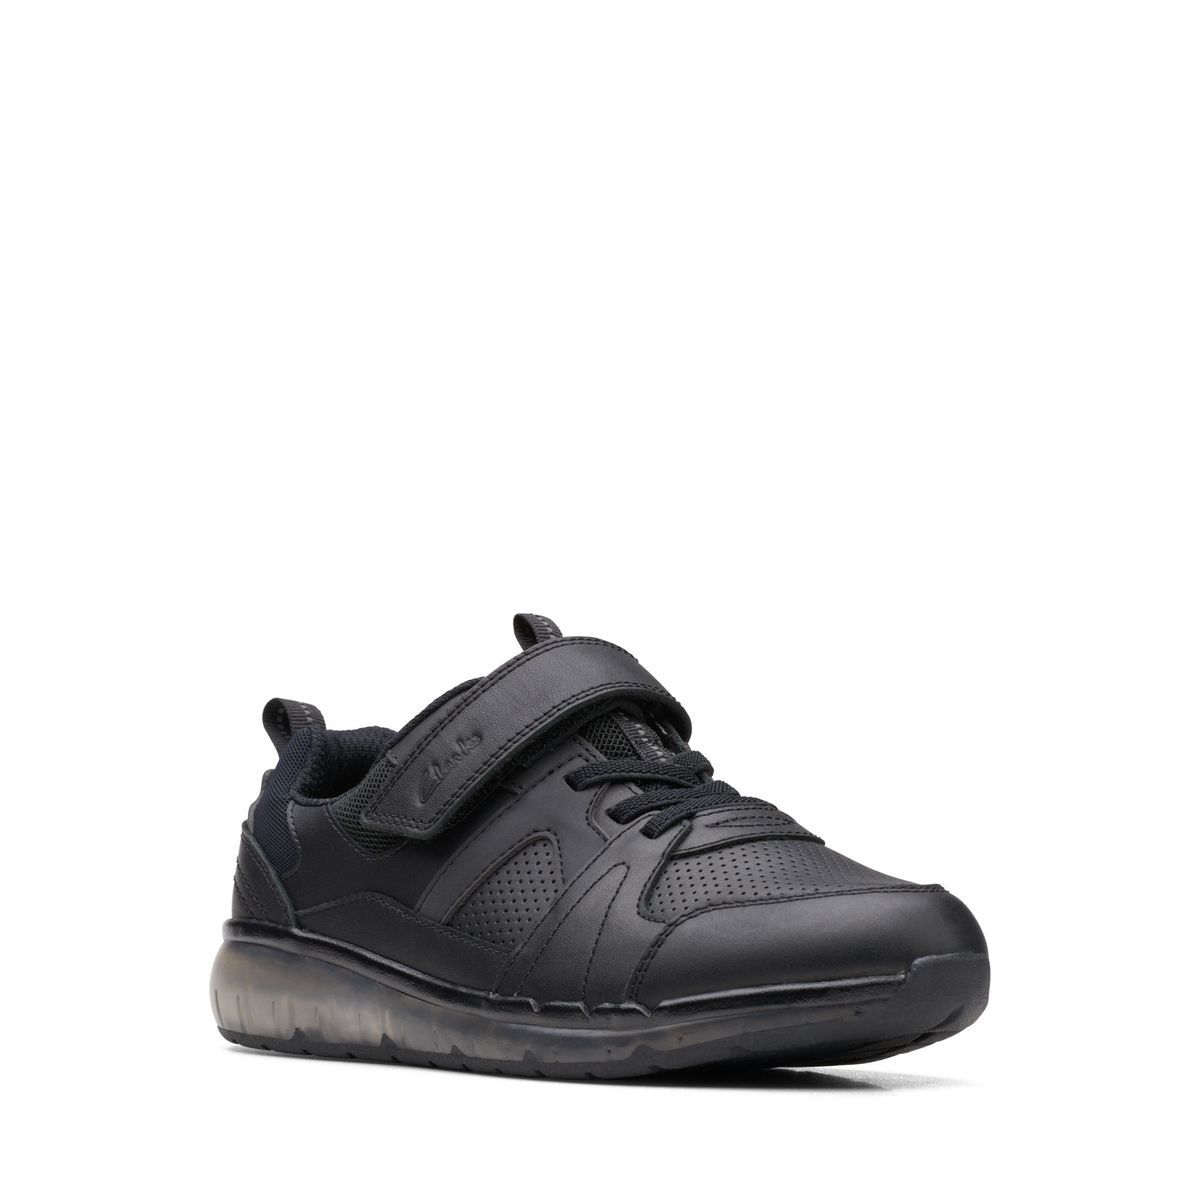 Clarks Spark Beam O Black leather Kids Boys Trainers 6791-86F in a Plain Leather in Size 1.5